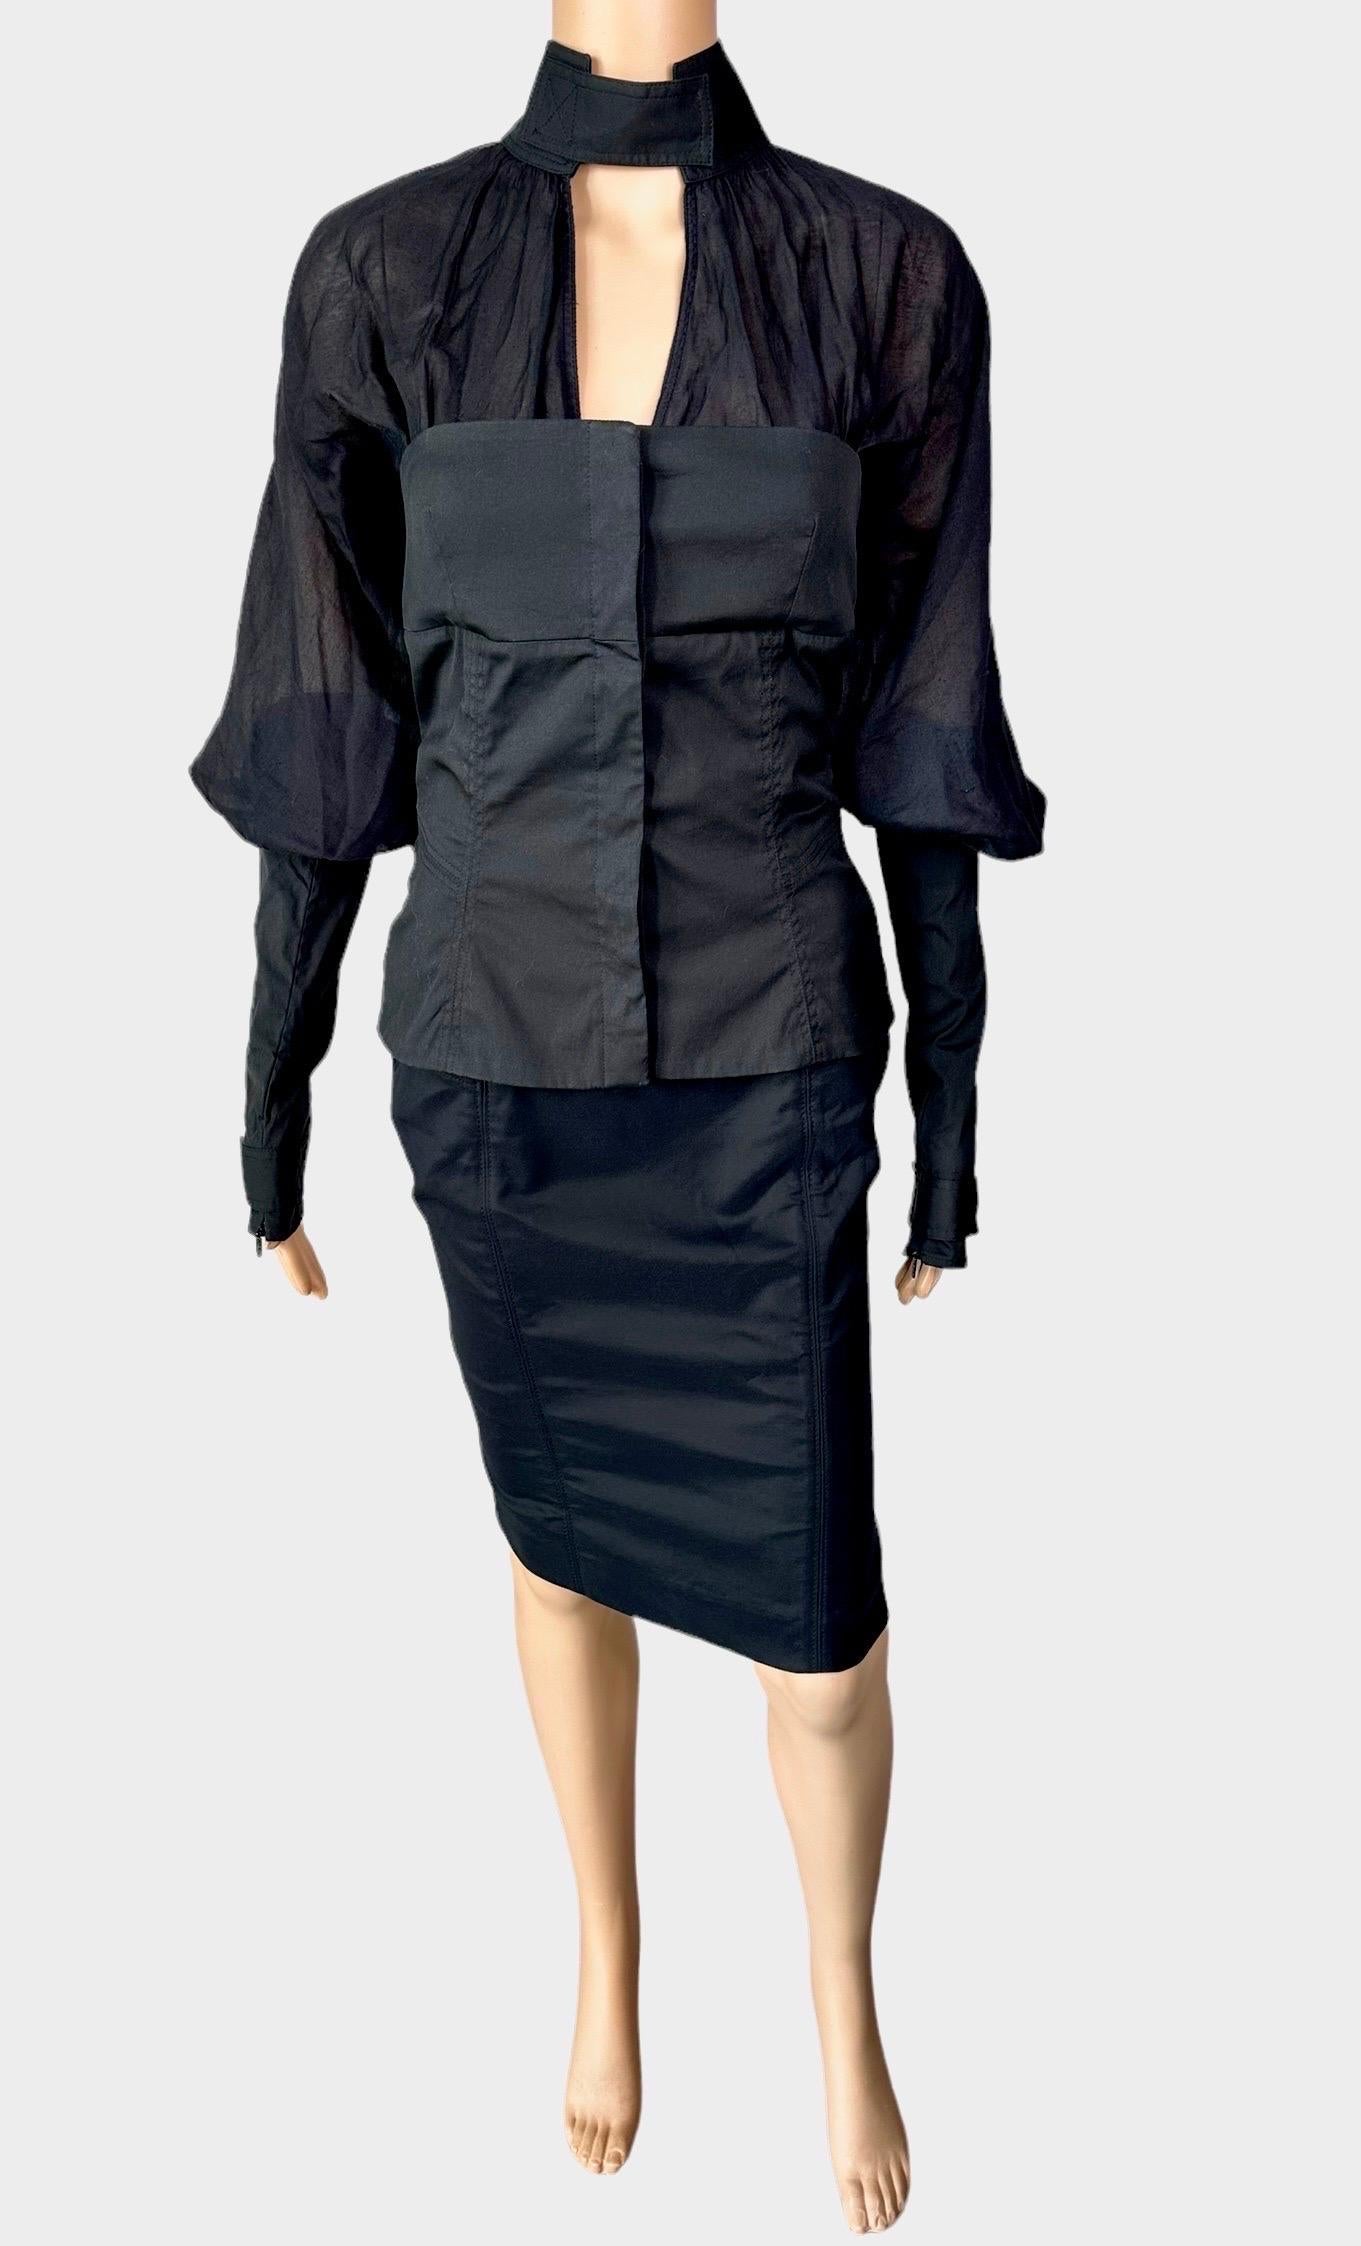 Tom Ford for Gucci F/W 2003 Jacket Top & Skirt Suit Black 2 Piece Set Ensemble For Sale 2